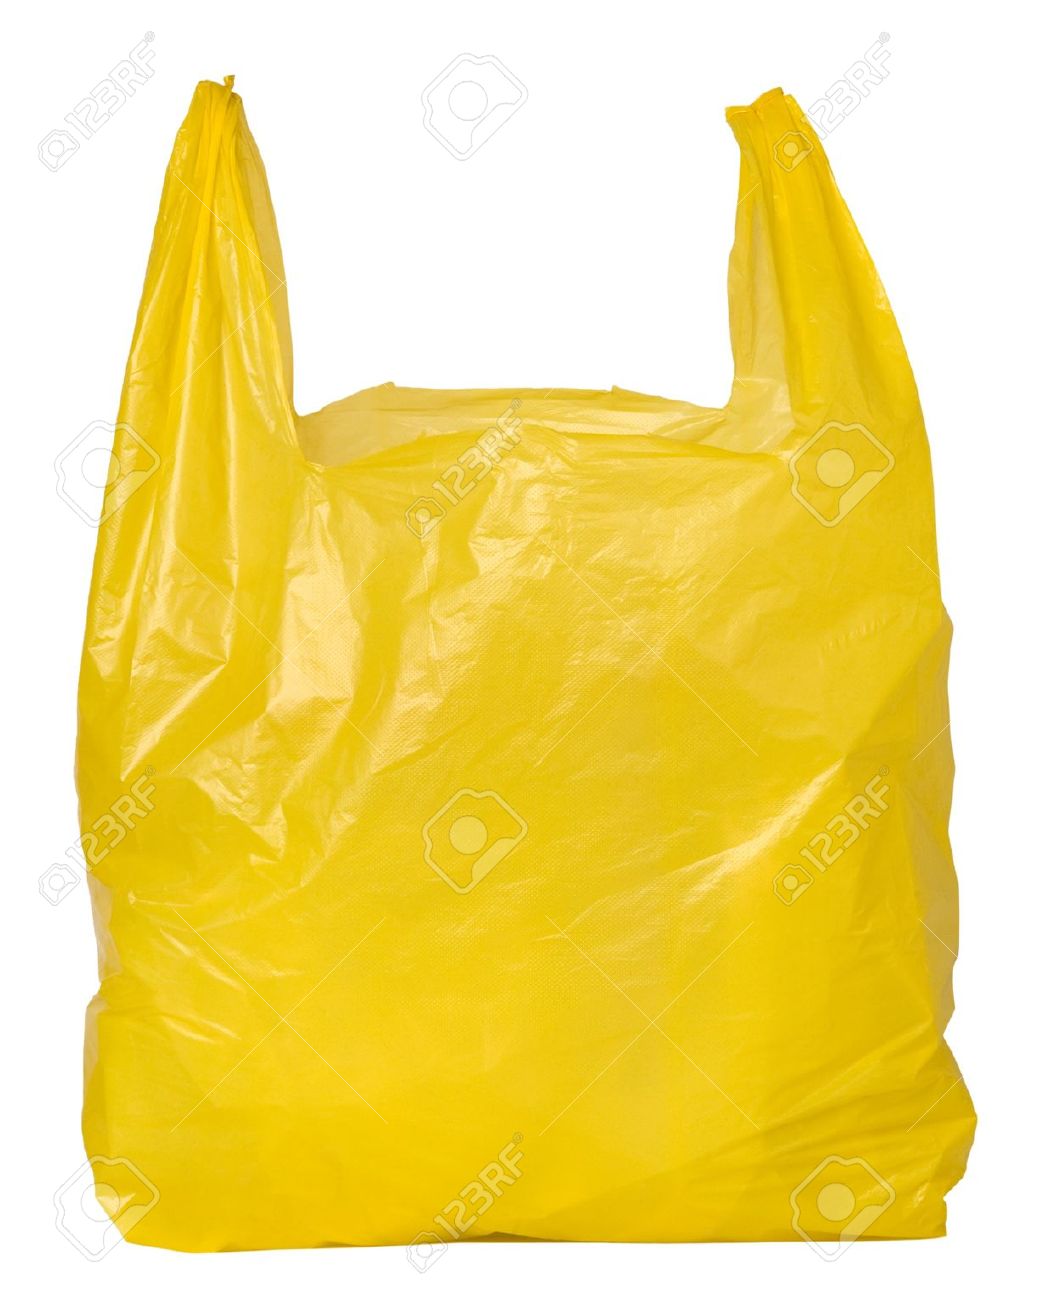 Plastic Bags Stock Photos Images. Royalty Free Plastic Bags Images.